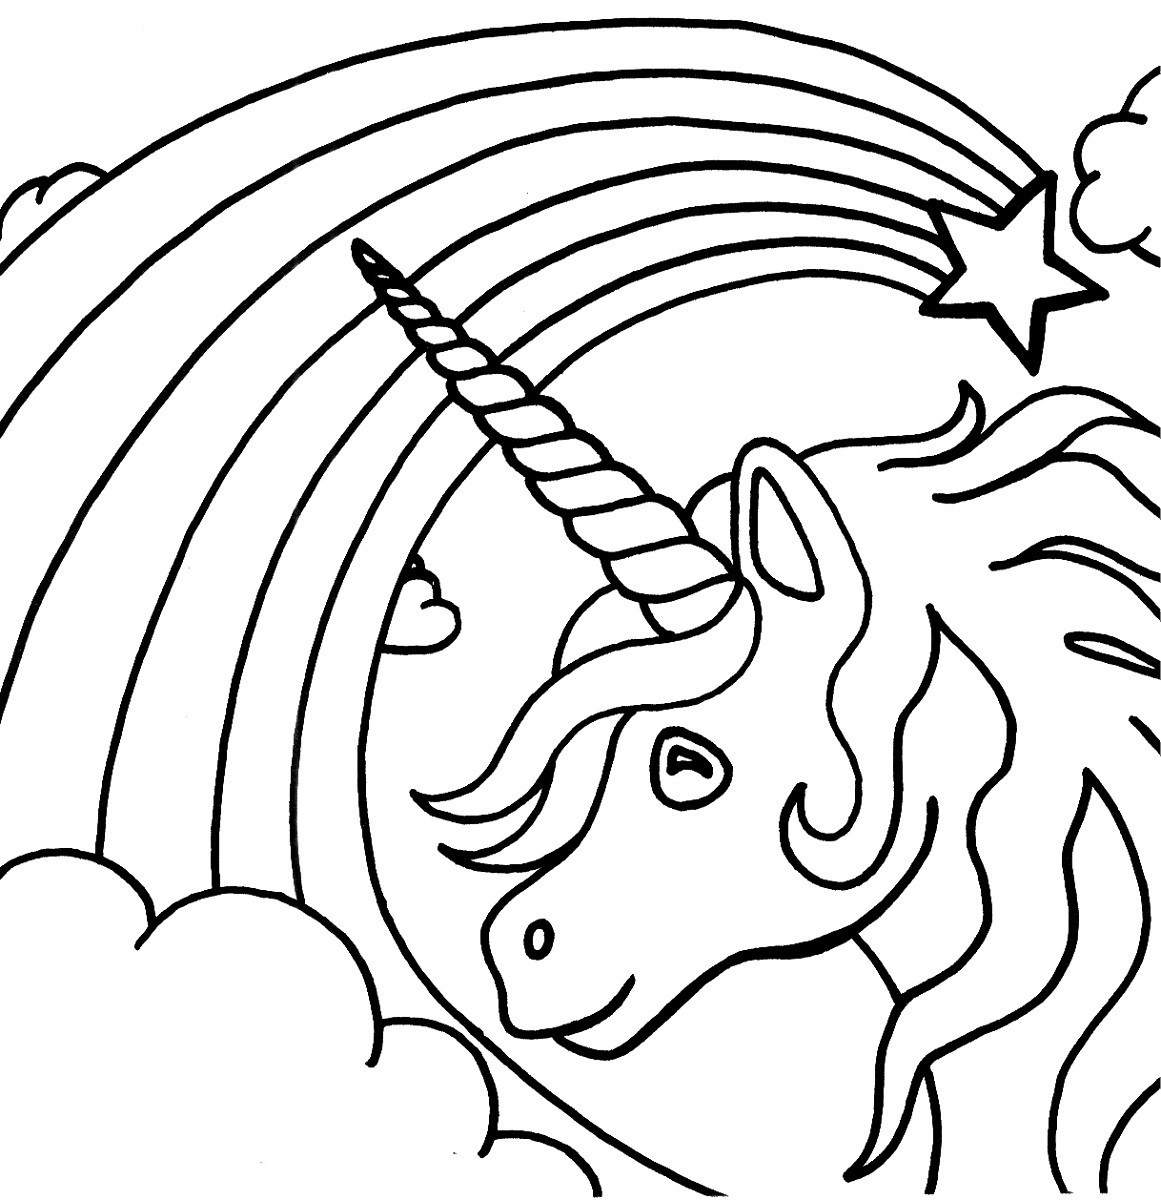 Kids Coloring Page Unicorn
 Unicorn Colouring In Pages to Print